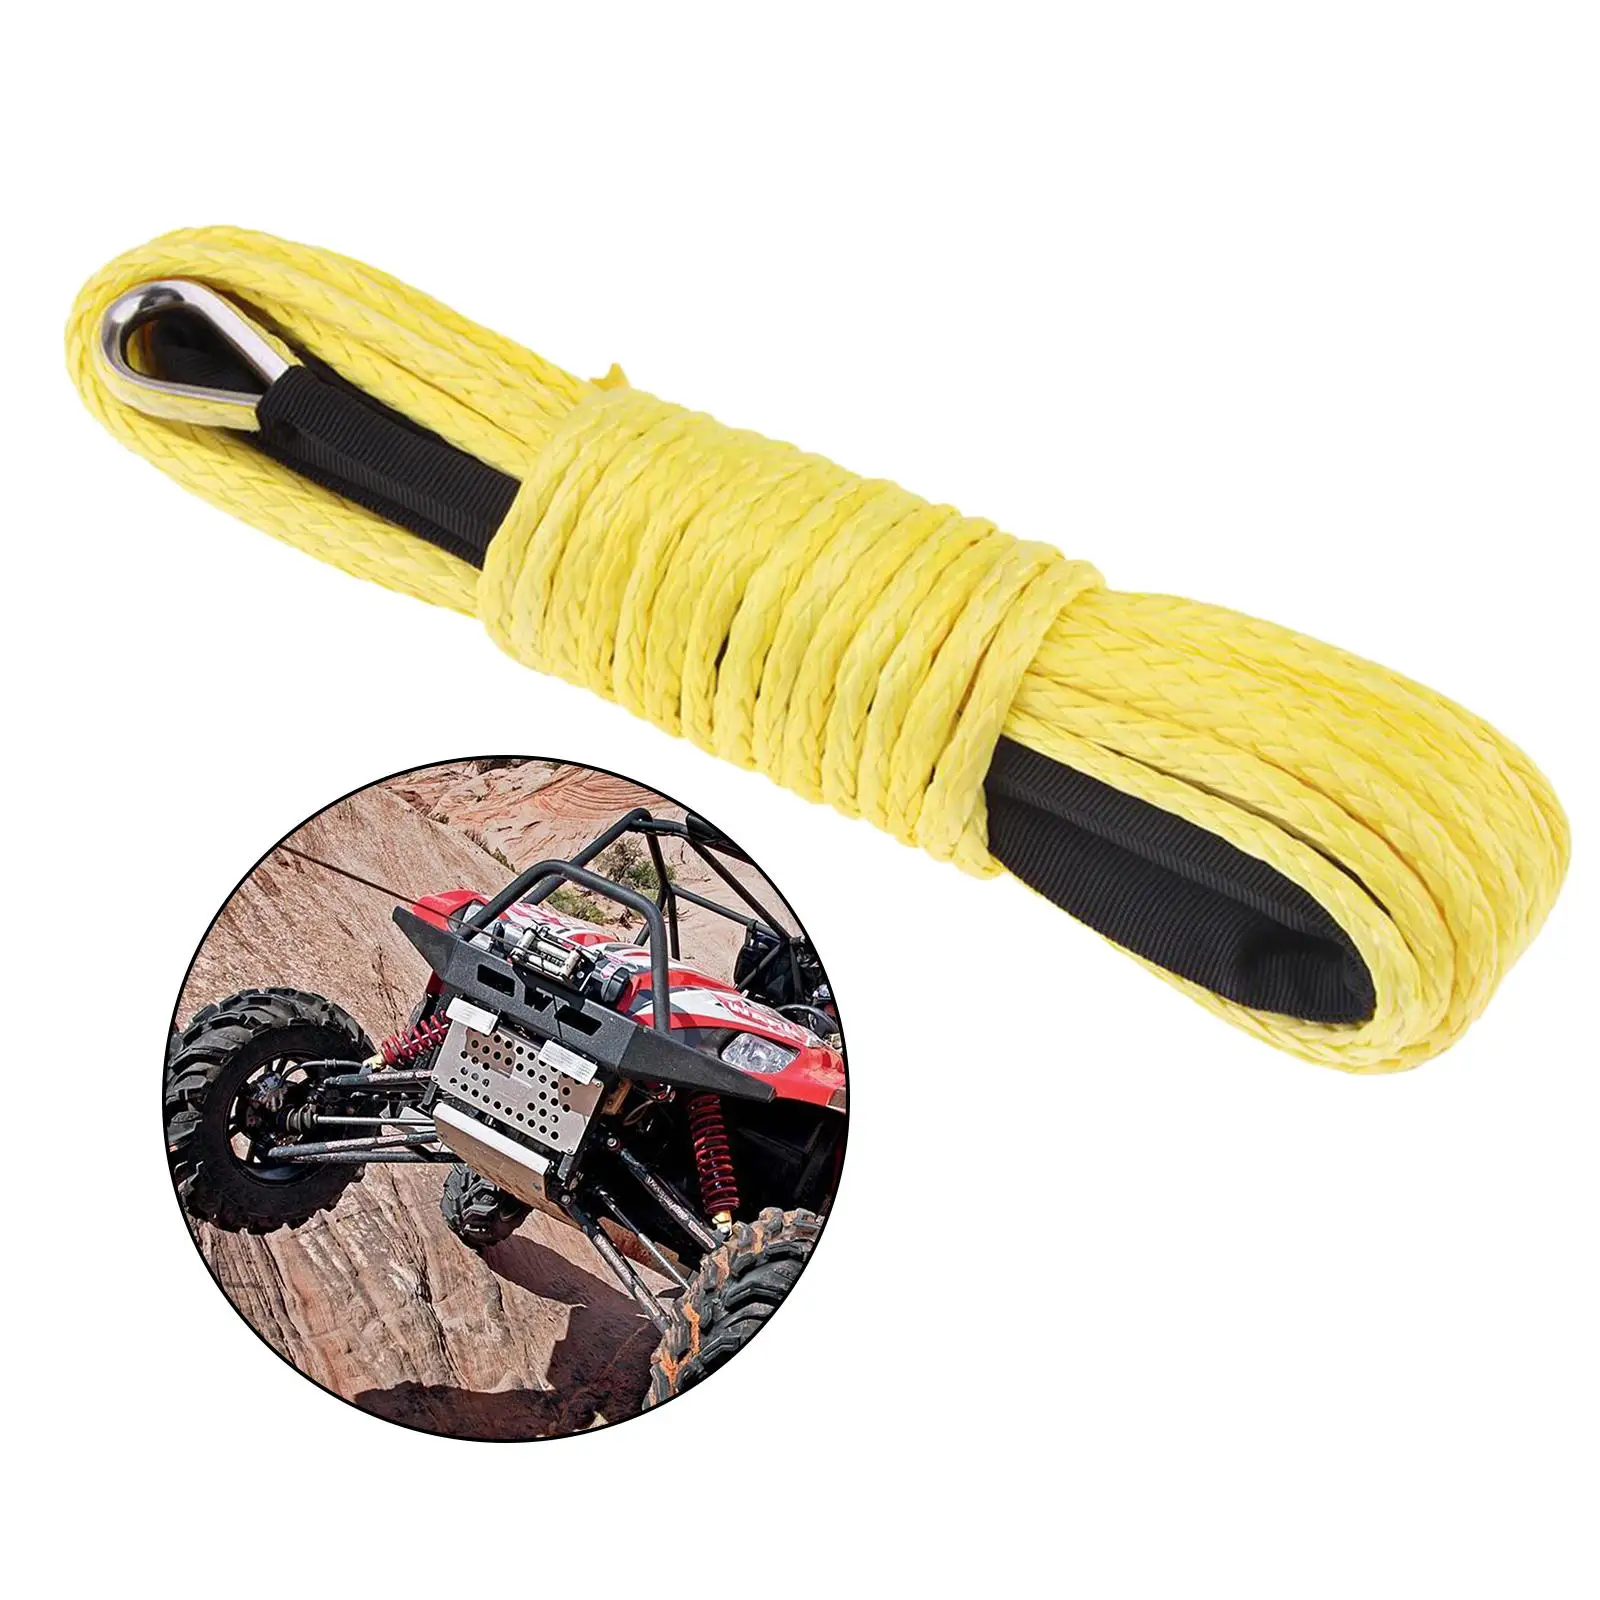 6mm x 15m 7700LBs Synthetic Fiber Winch Line Cable Rope w/ Protecing Sleeve for ATV UTV